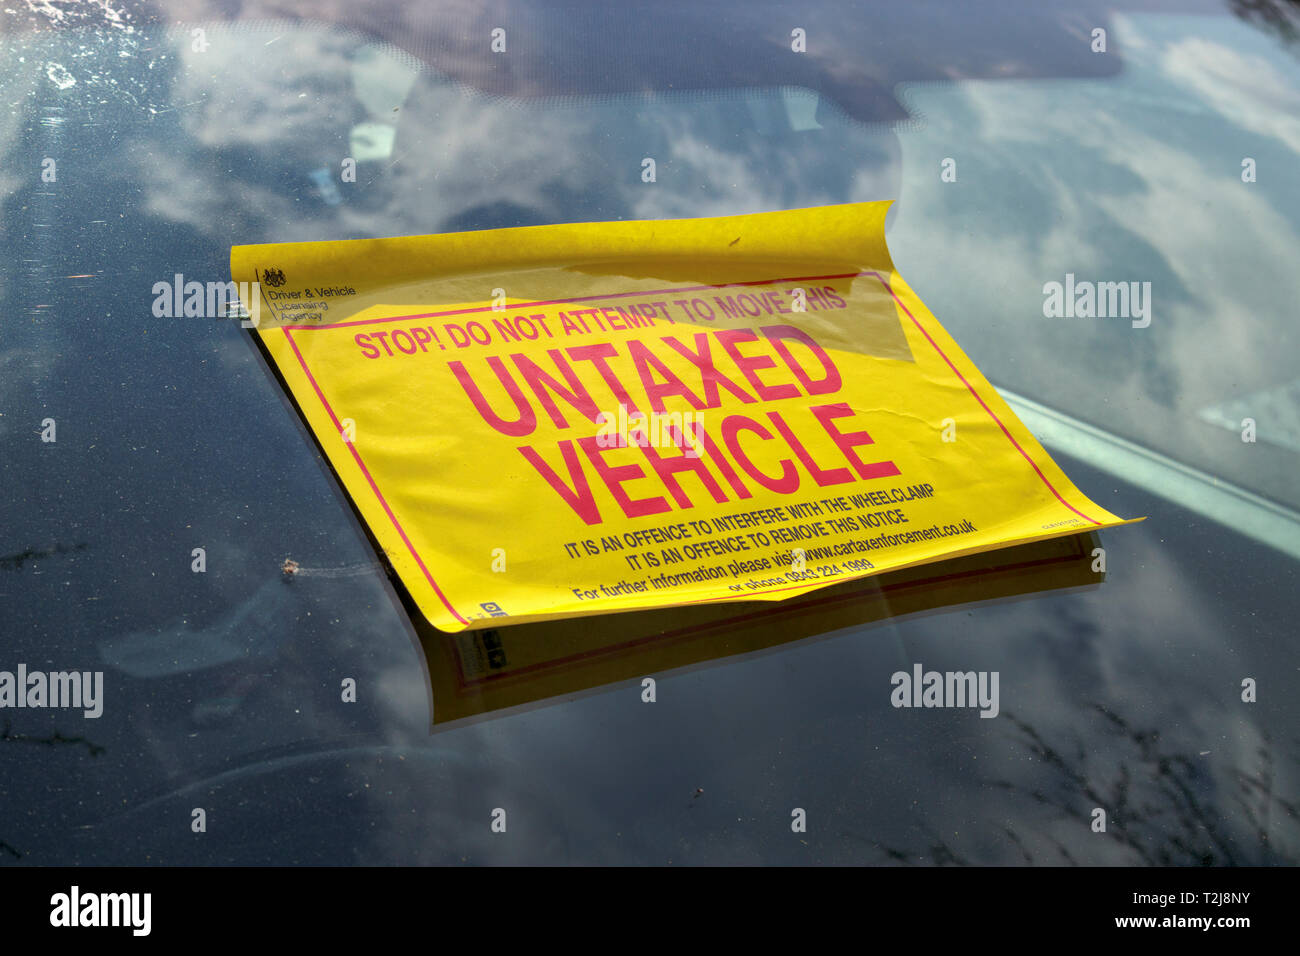 Untaxed vehicle sticker on the windscreen of a car immobilised at the roadside by a yellow DVLA clamp, for non-payment of road tax Stock Photo